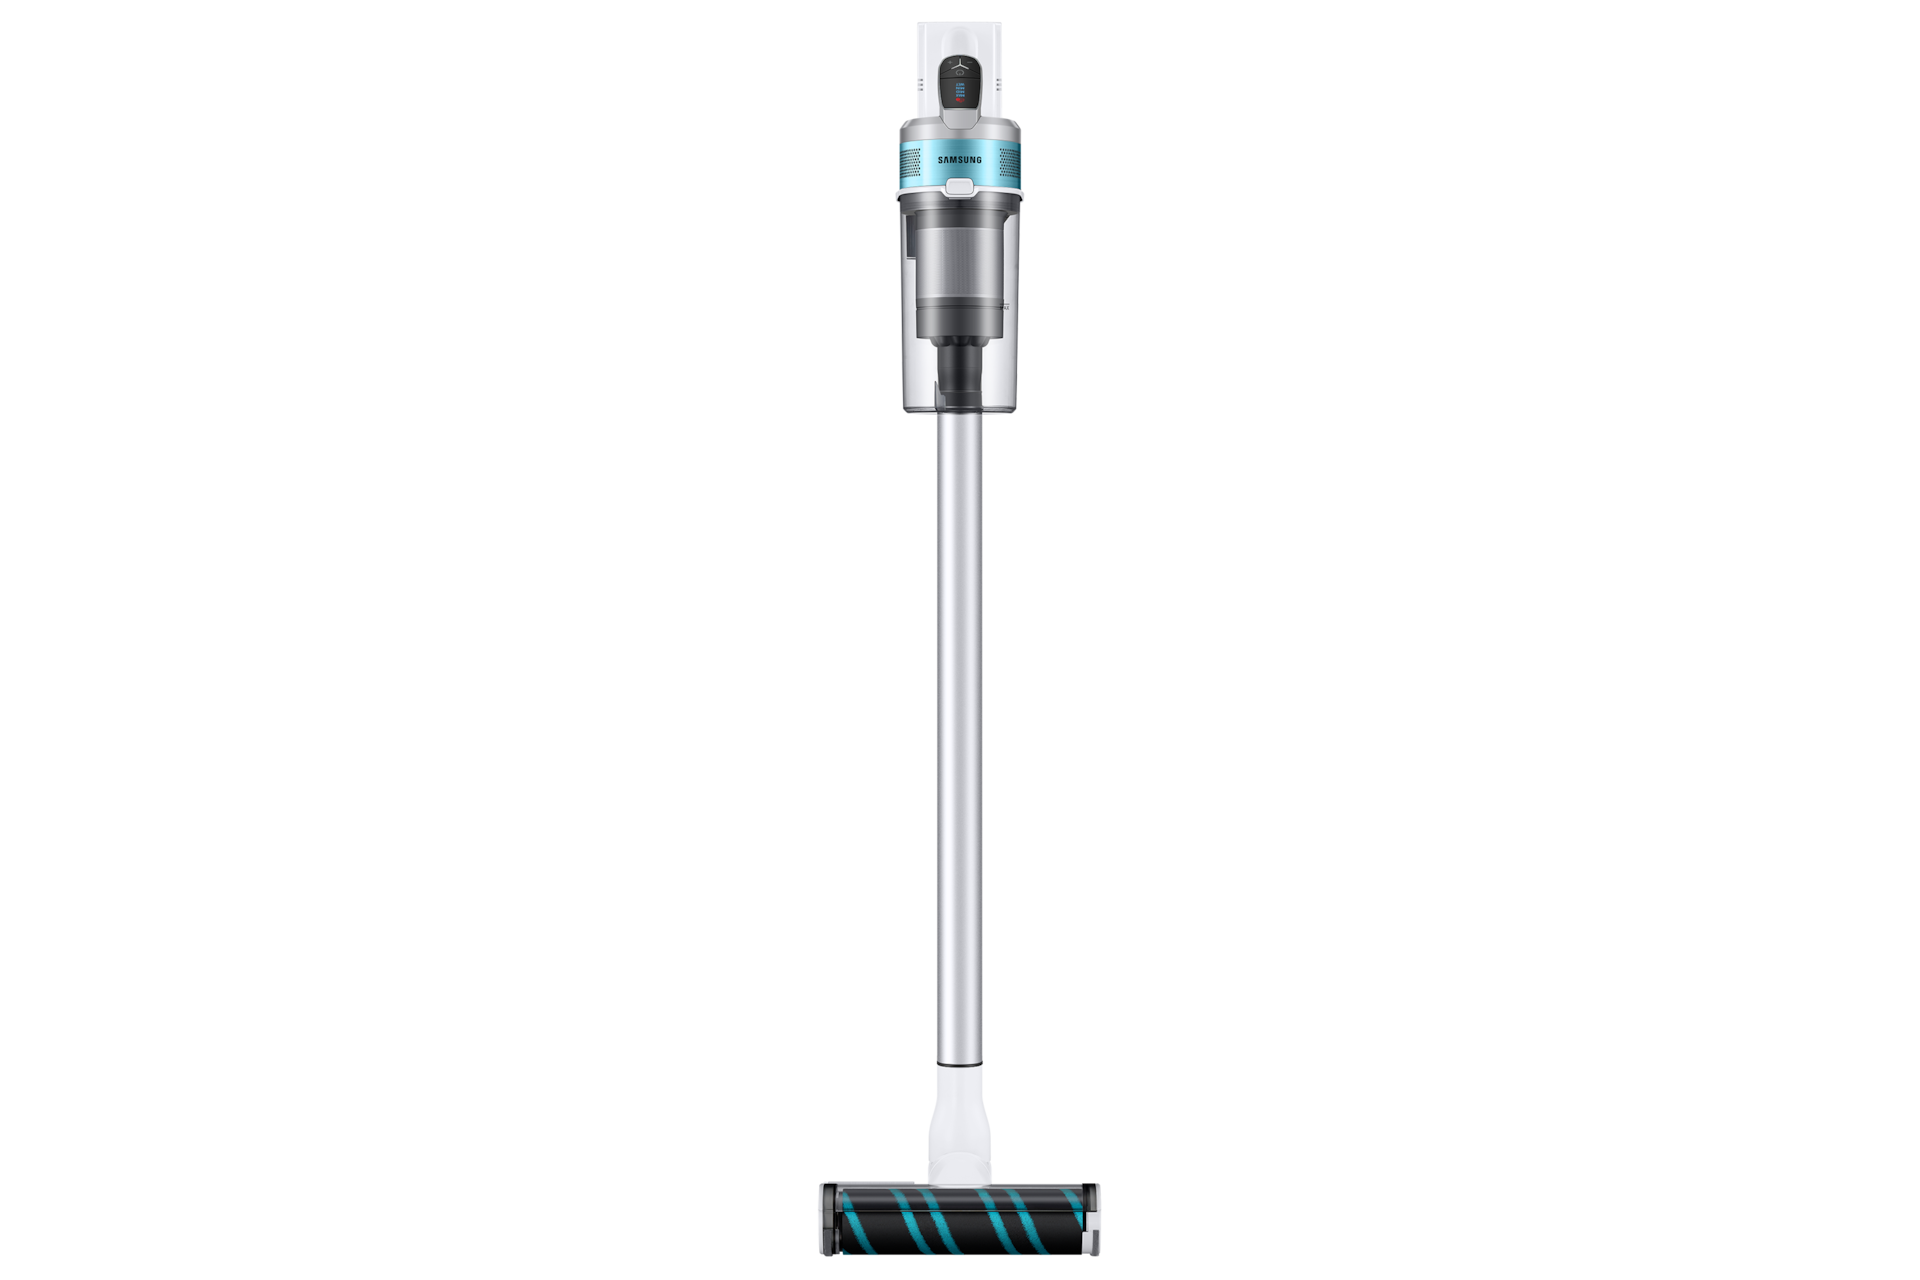 Shop for Samsung VS15T7034R1/SP now. Jet 70 multi vacuum in white seen from front with soft action brush attached